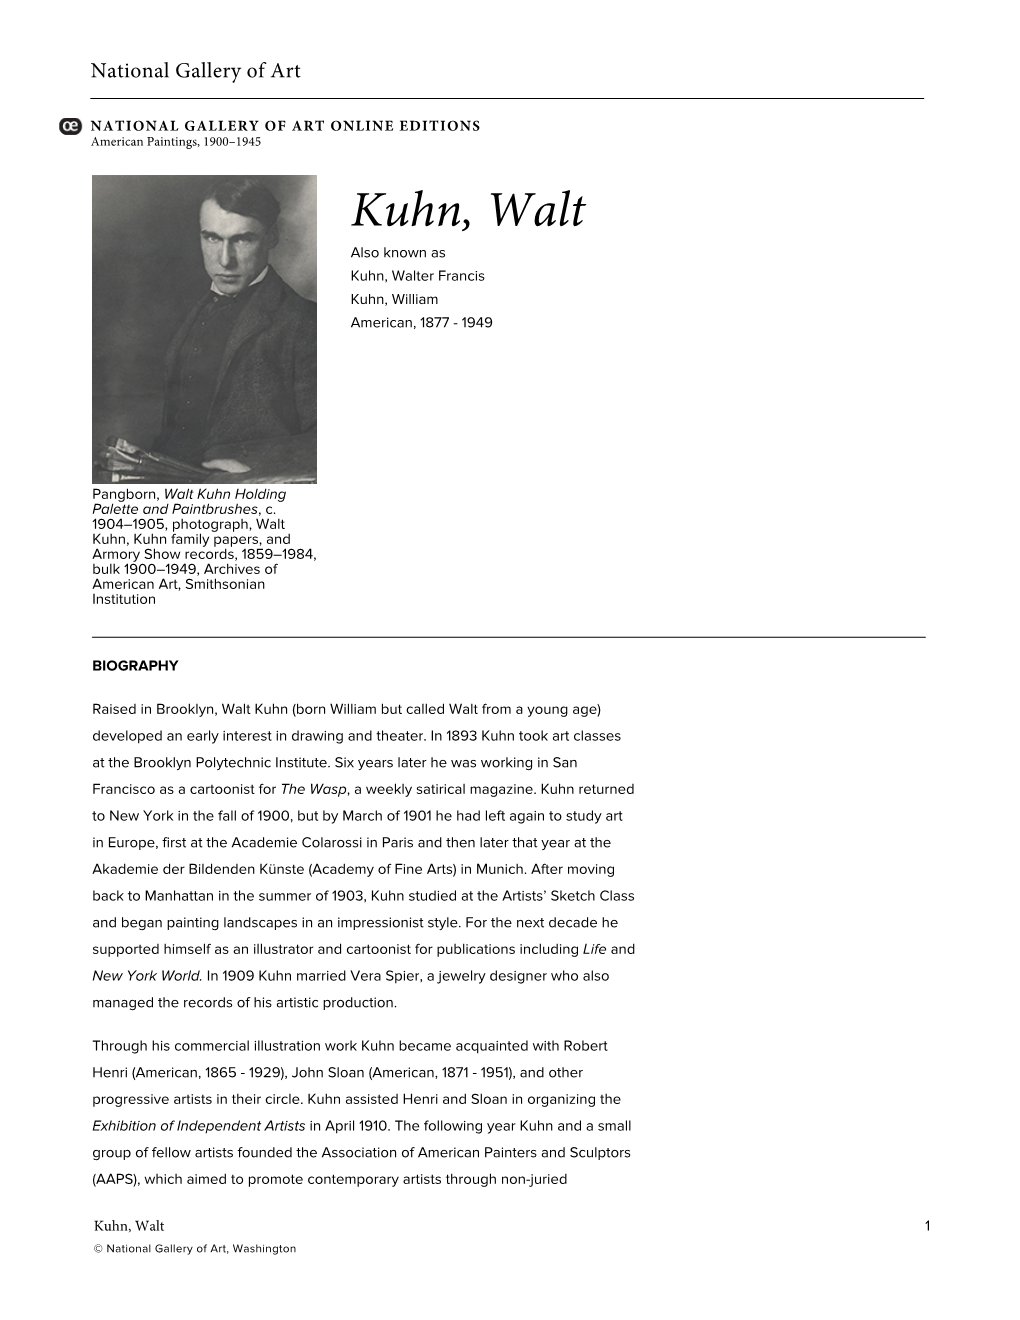 Kuhn, Walt Also Known As Kuhn, Walter Francis Kuhn, William American, 1877 - 1949